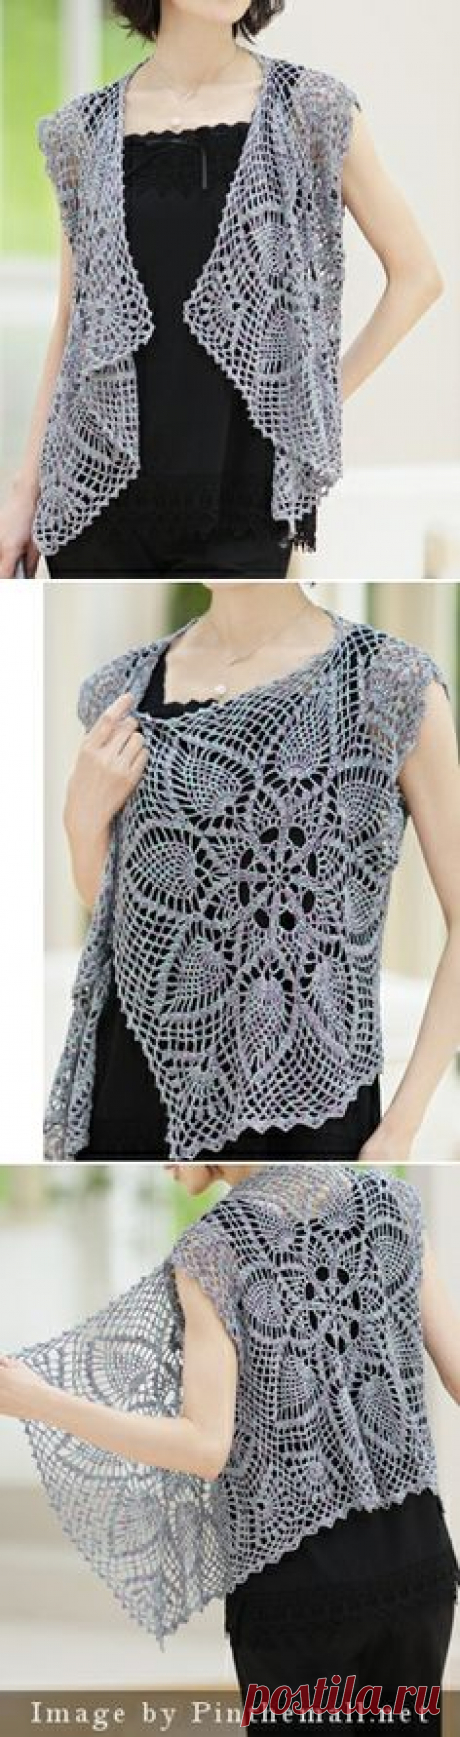 crochet - pineapple lace sleeveless cardigan top with waterfall front - love this - I think it's just three rectangles